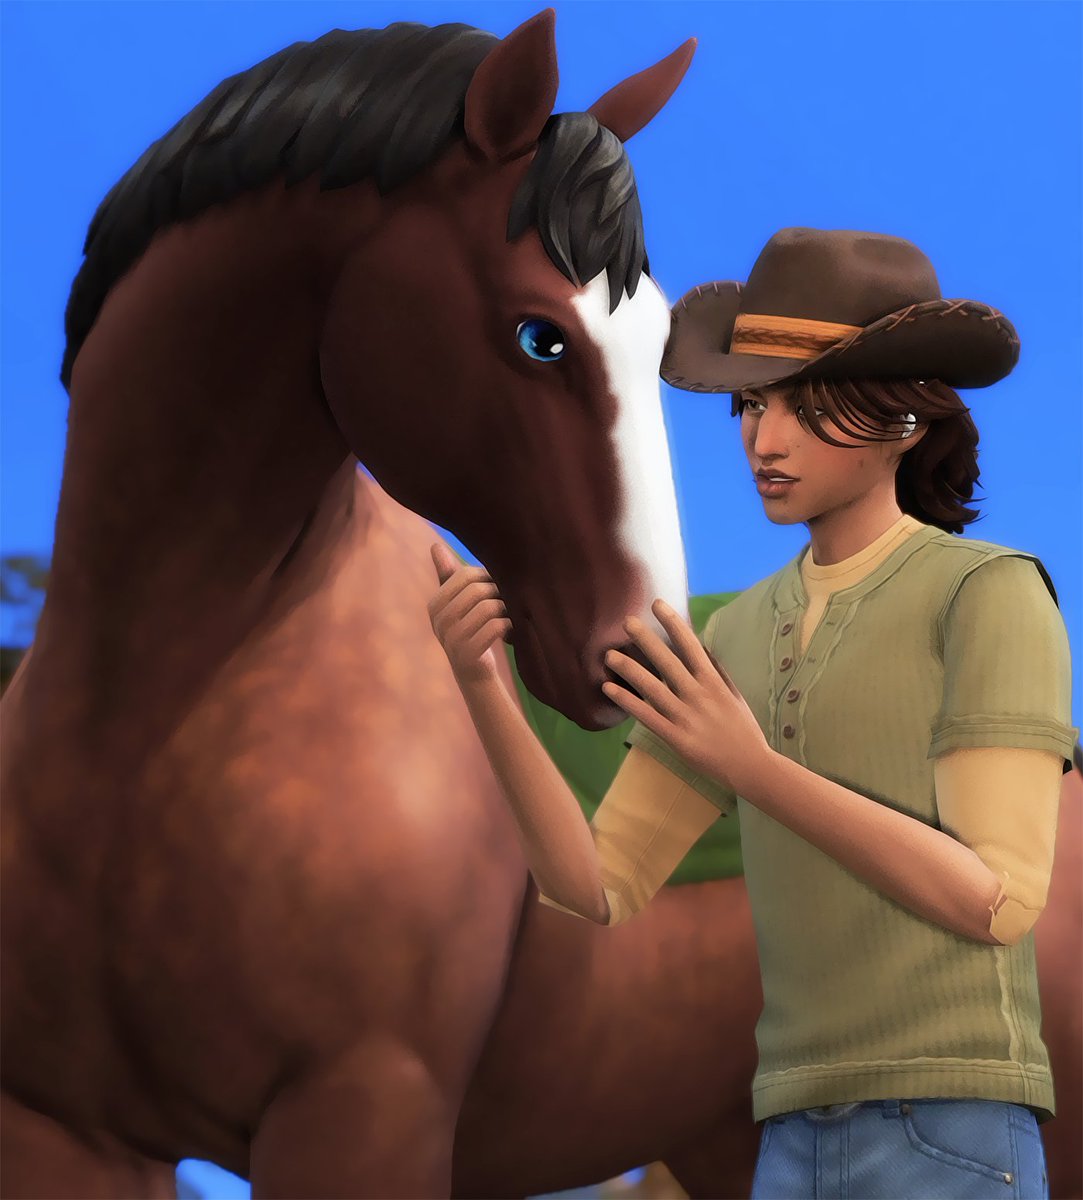 𝒈𝒓𝒐𝒘𝒊𝒏𝒈 𝒖𝒑 𝒕𝒐𝒈𝒆𝒕𝒉𝒆𝒓 ♡

#TheSims4 #ShowUsYourSims #HorseRanch